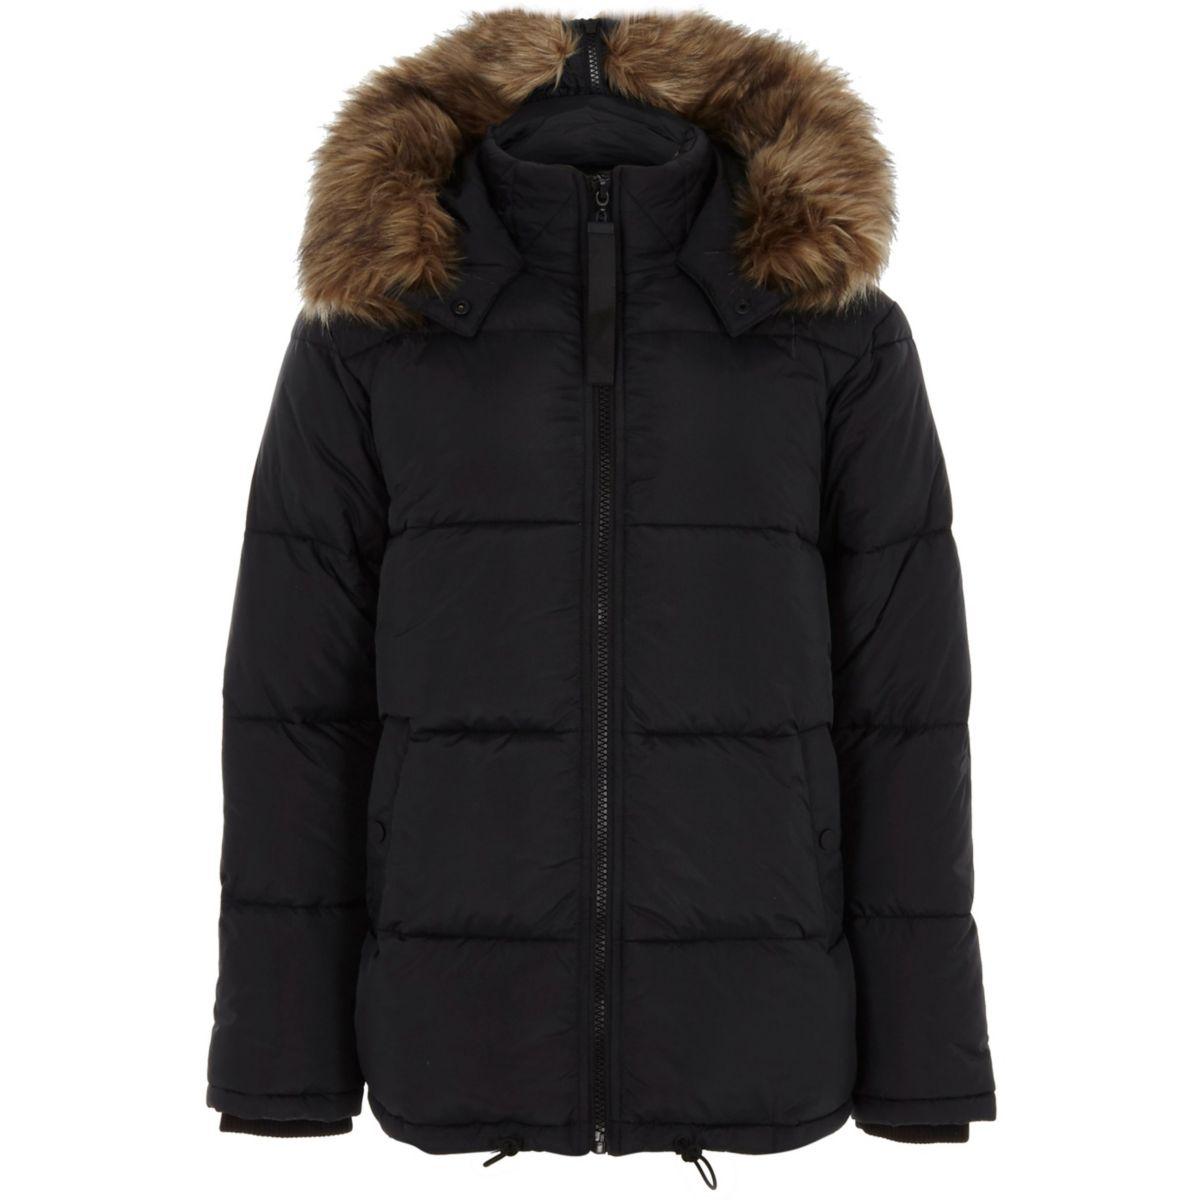 Lyst - River island Big And Tall Black Hooded Puffer Jacket Big And ...